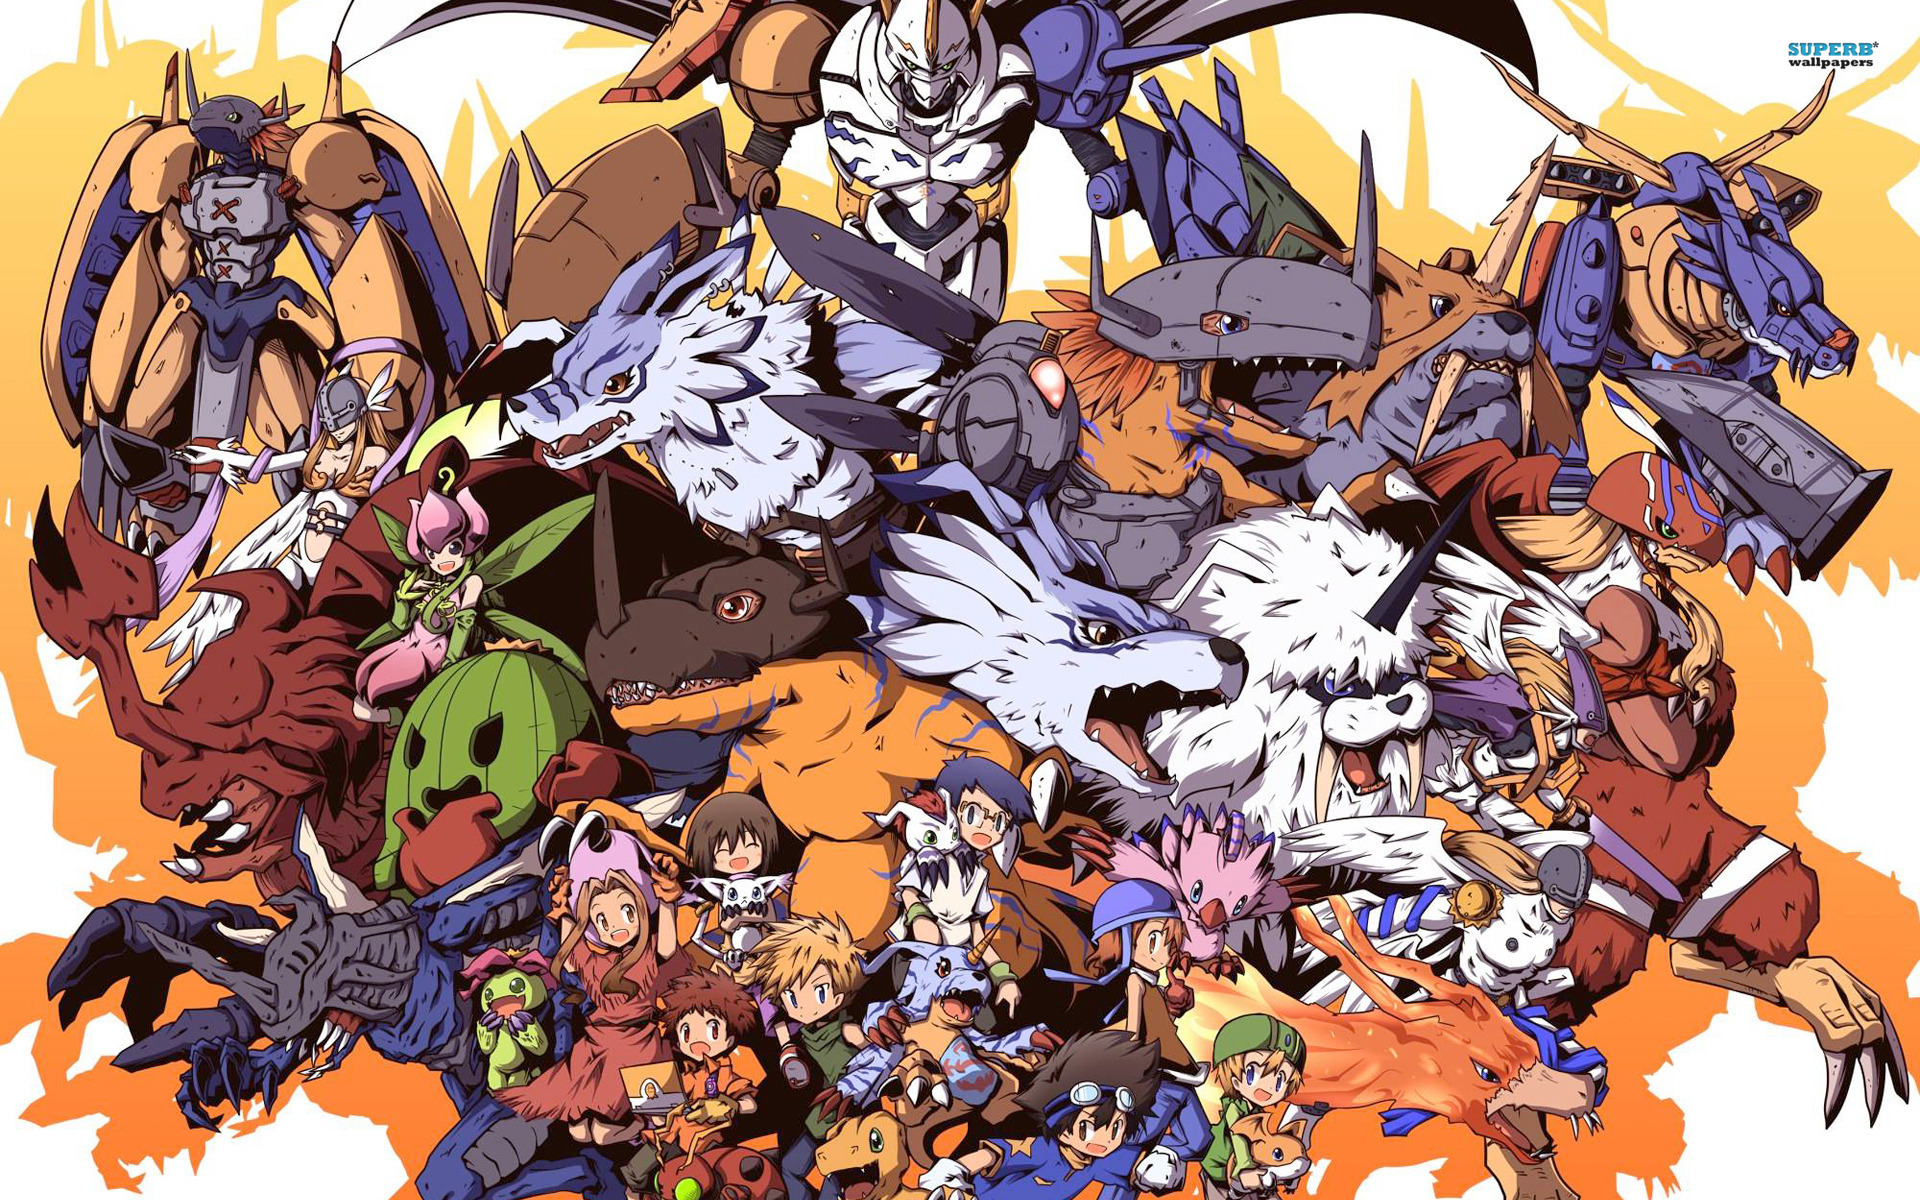 Day Is There A Digimon Wallpaper On Your Puter Unfortunately No